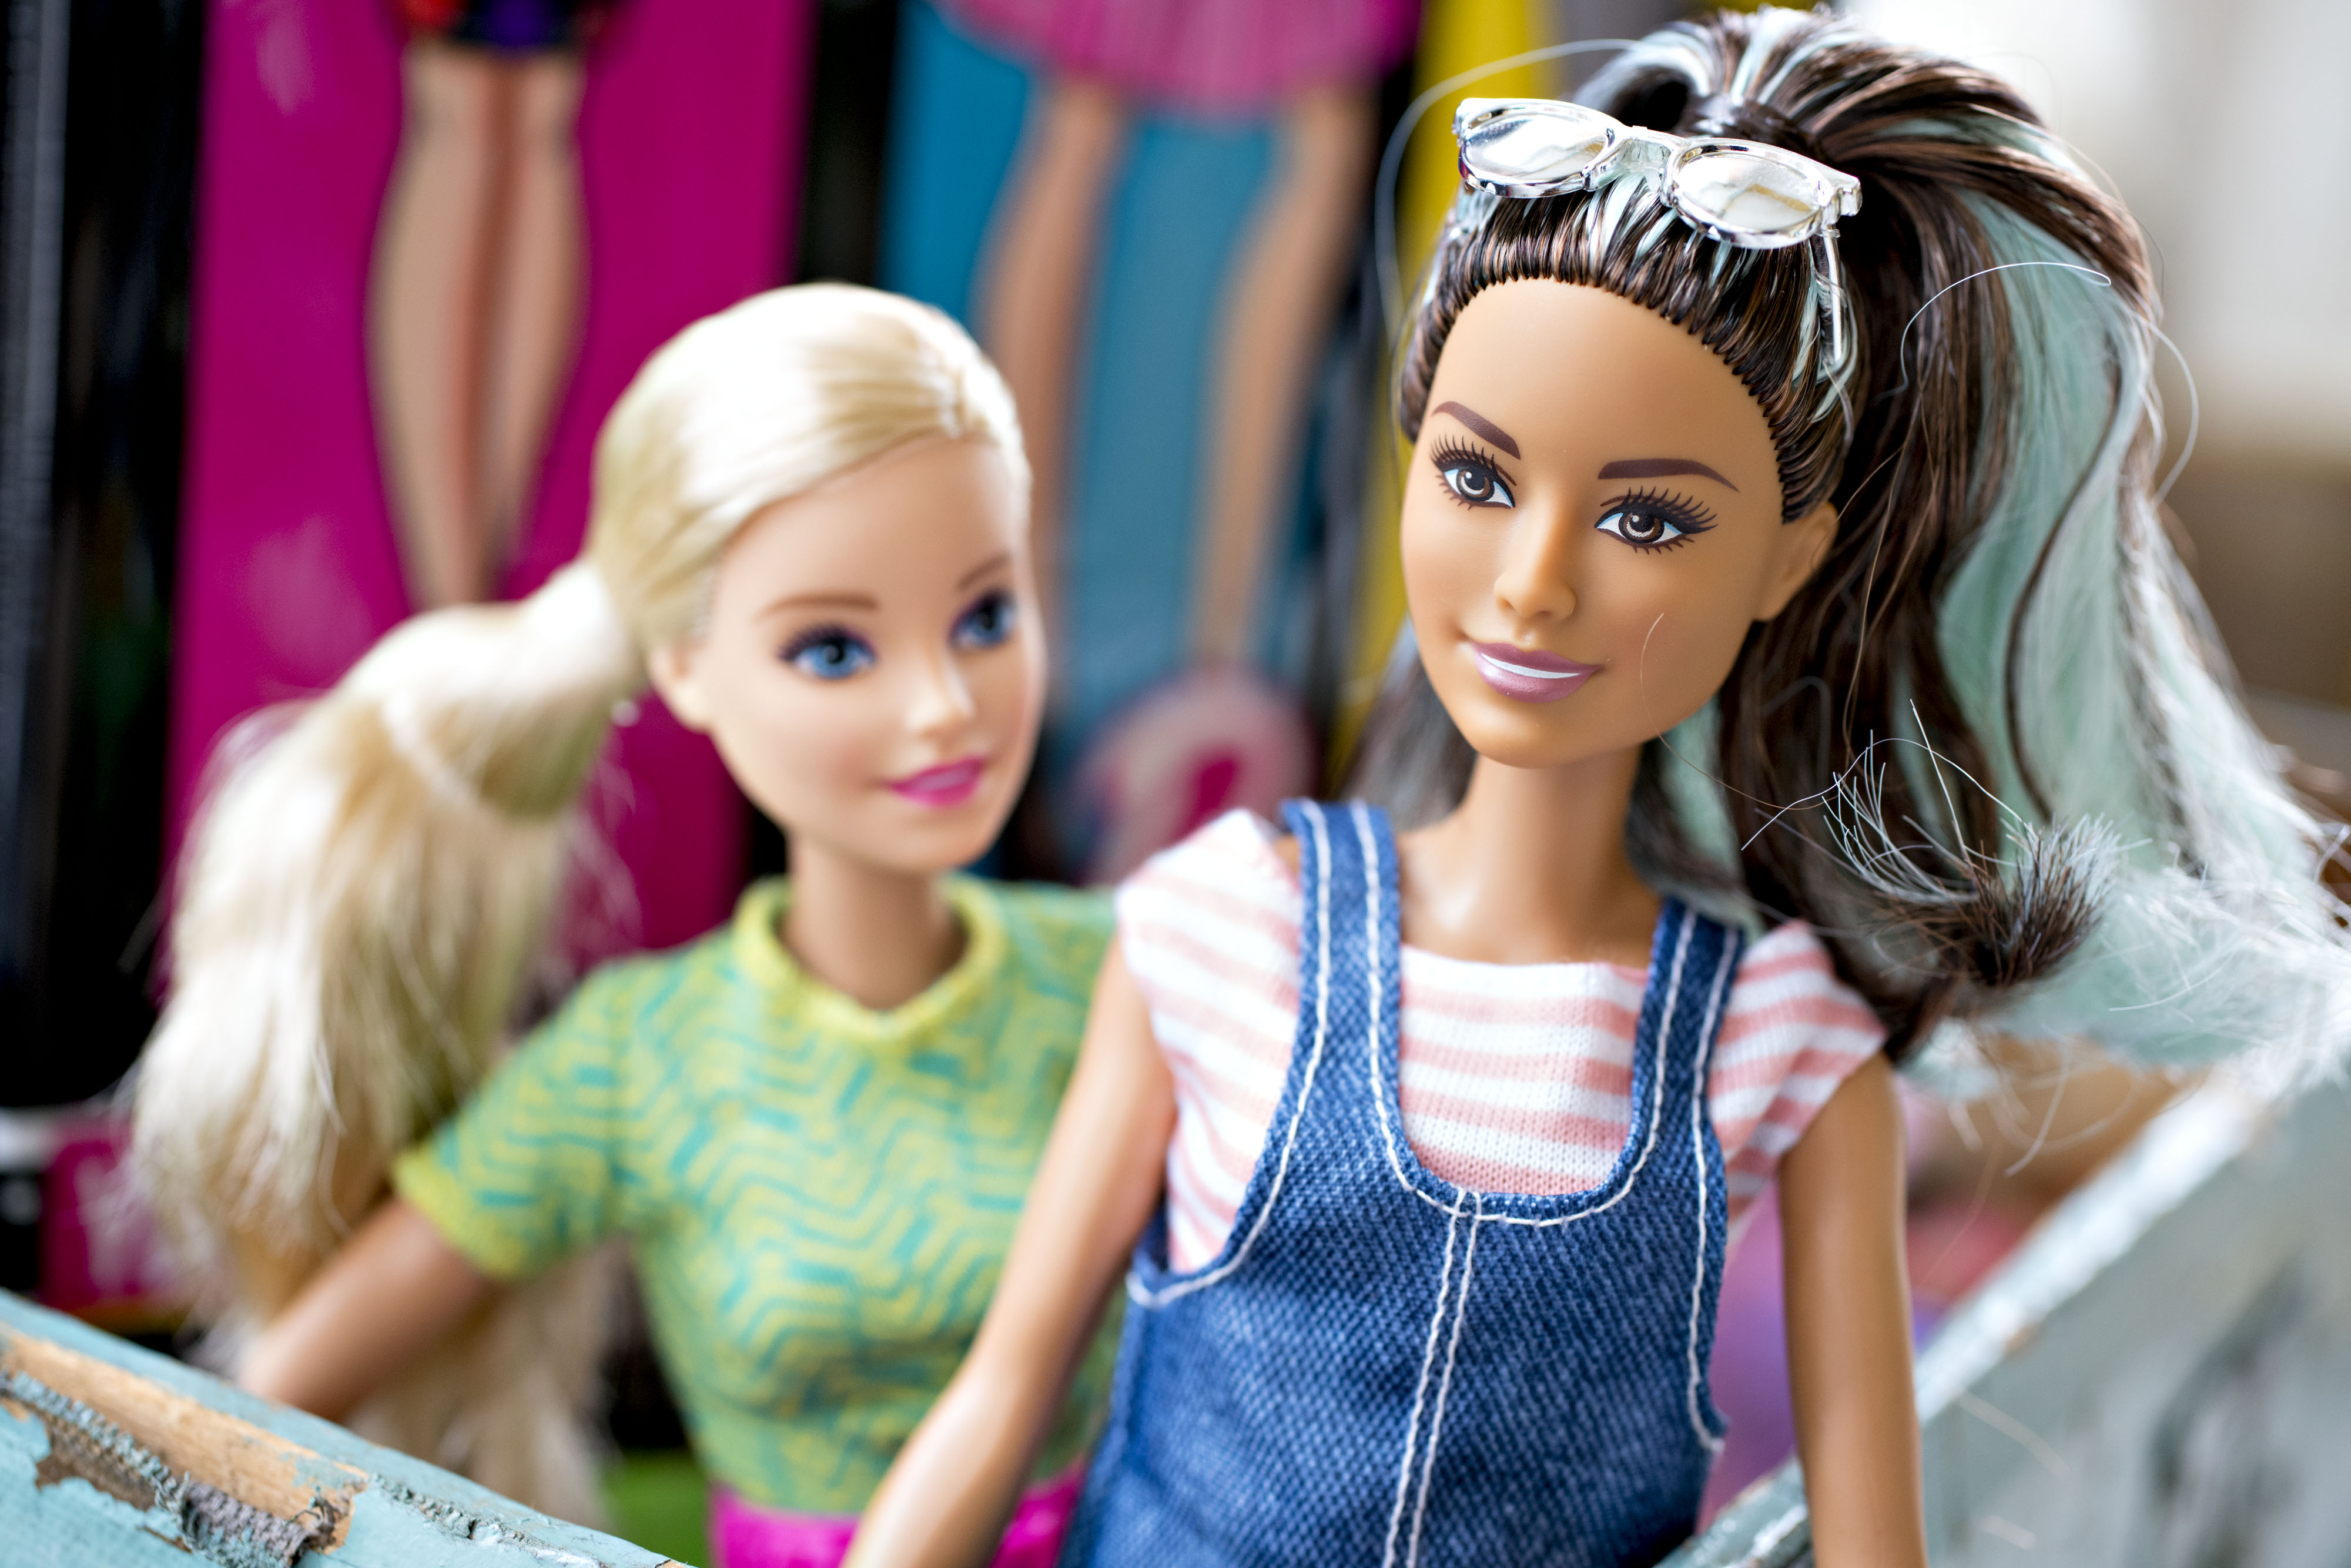 Mattel Hopes to Reinvent Barbie With an Assist From Hollywood - Bloomberg